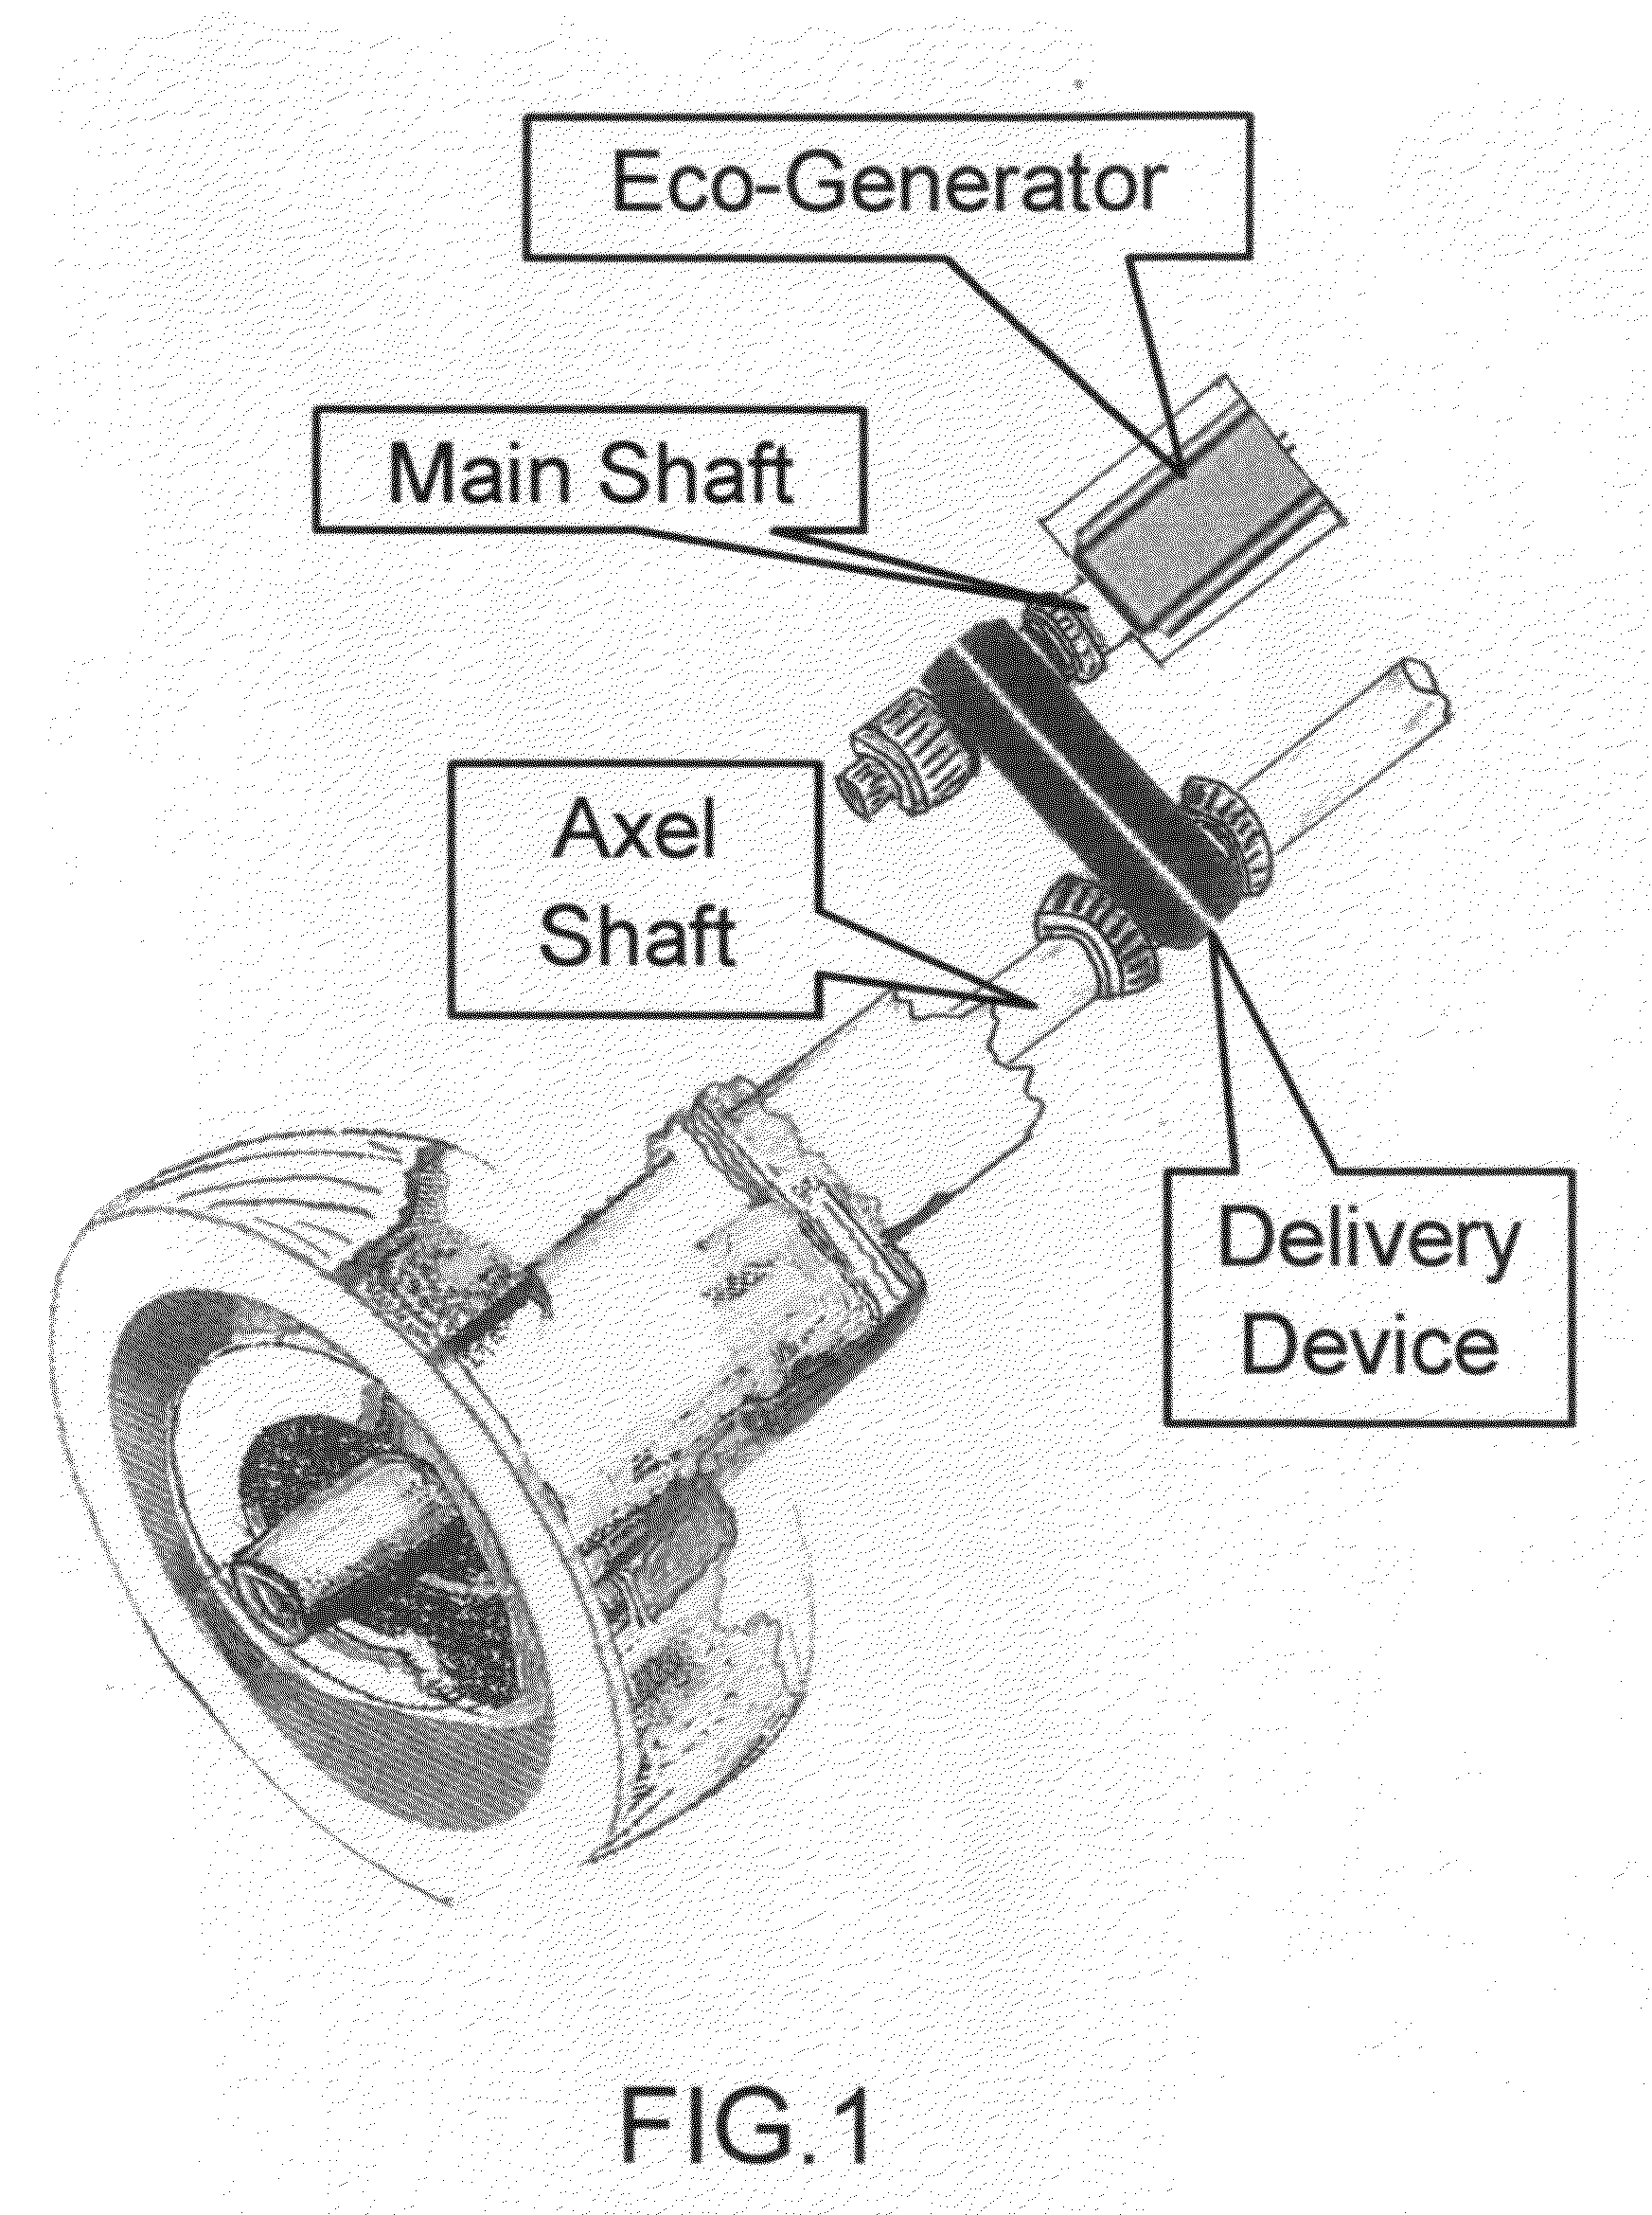 Method for internally generating electric energy in electric vehicles